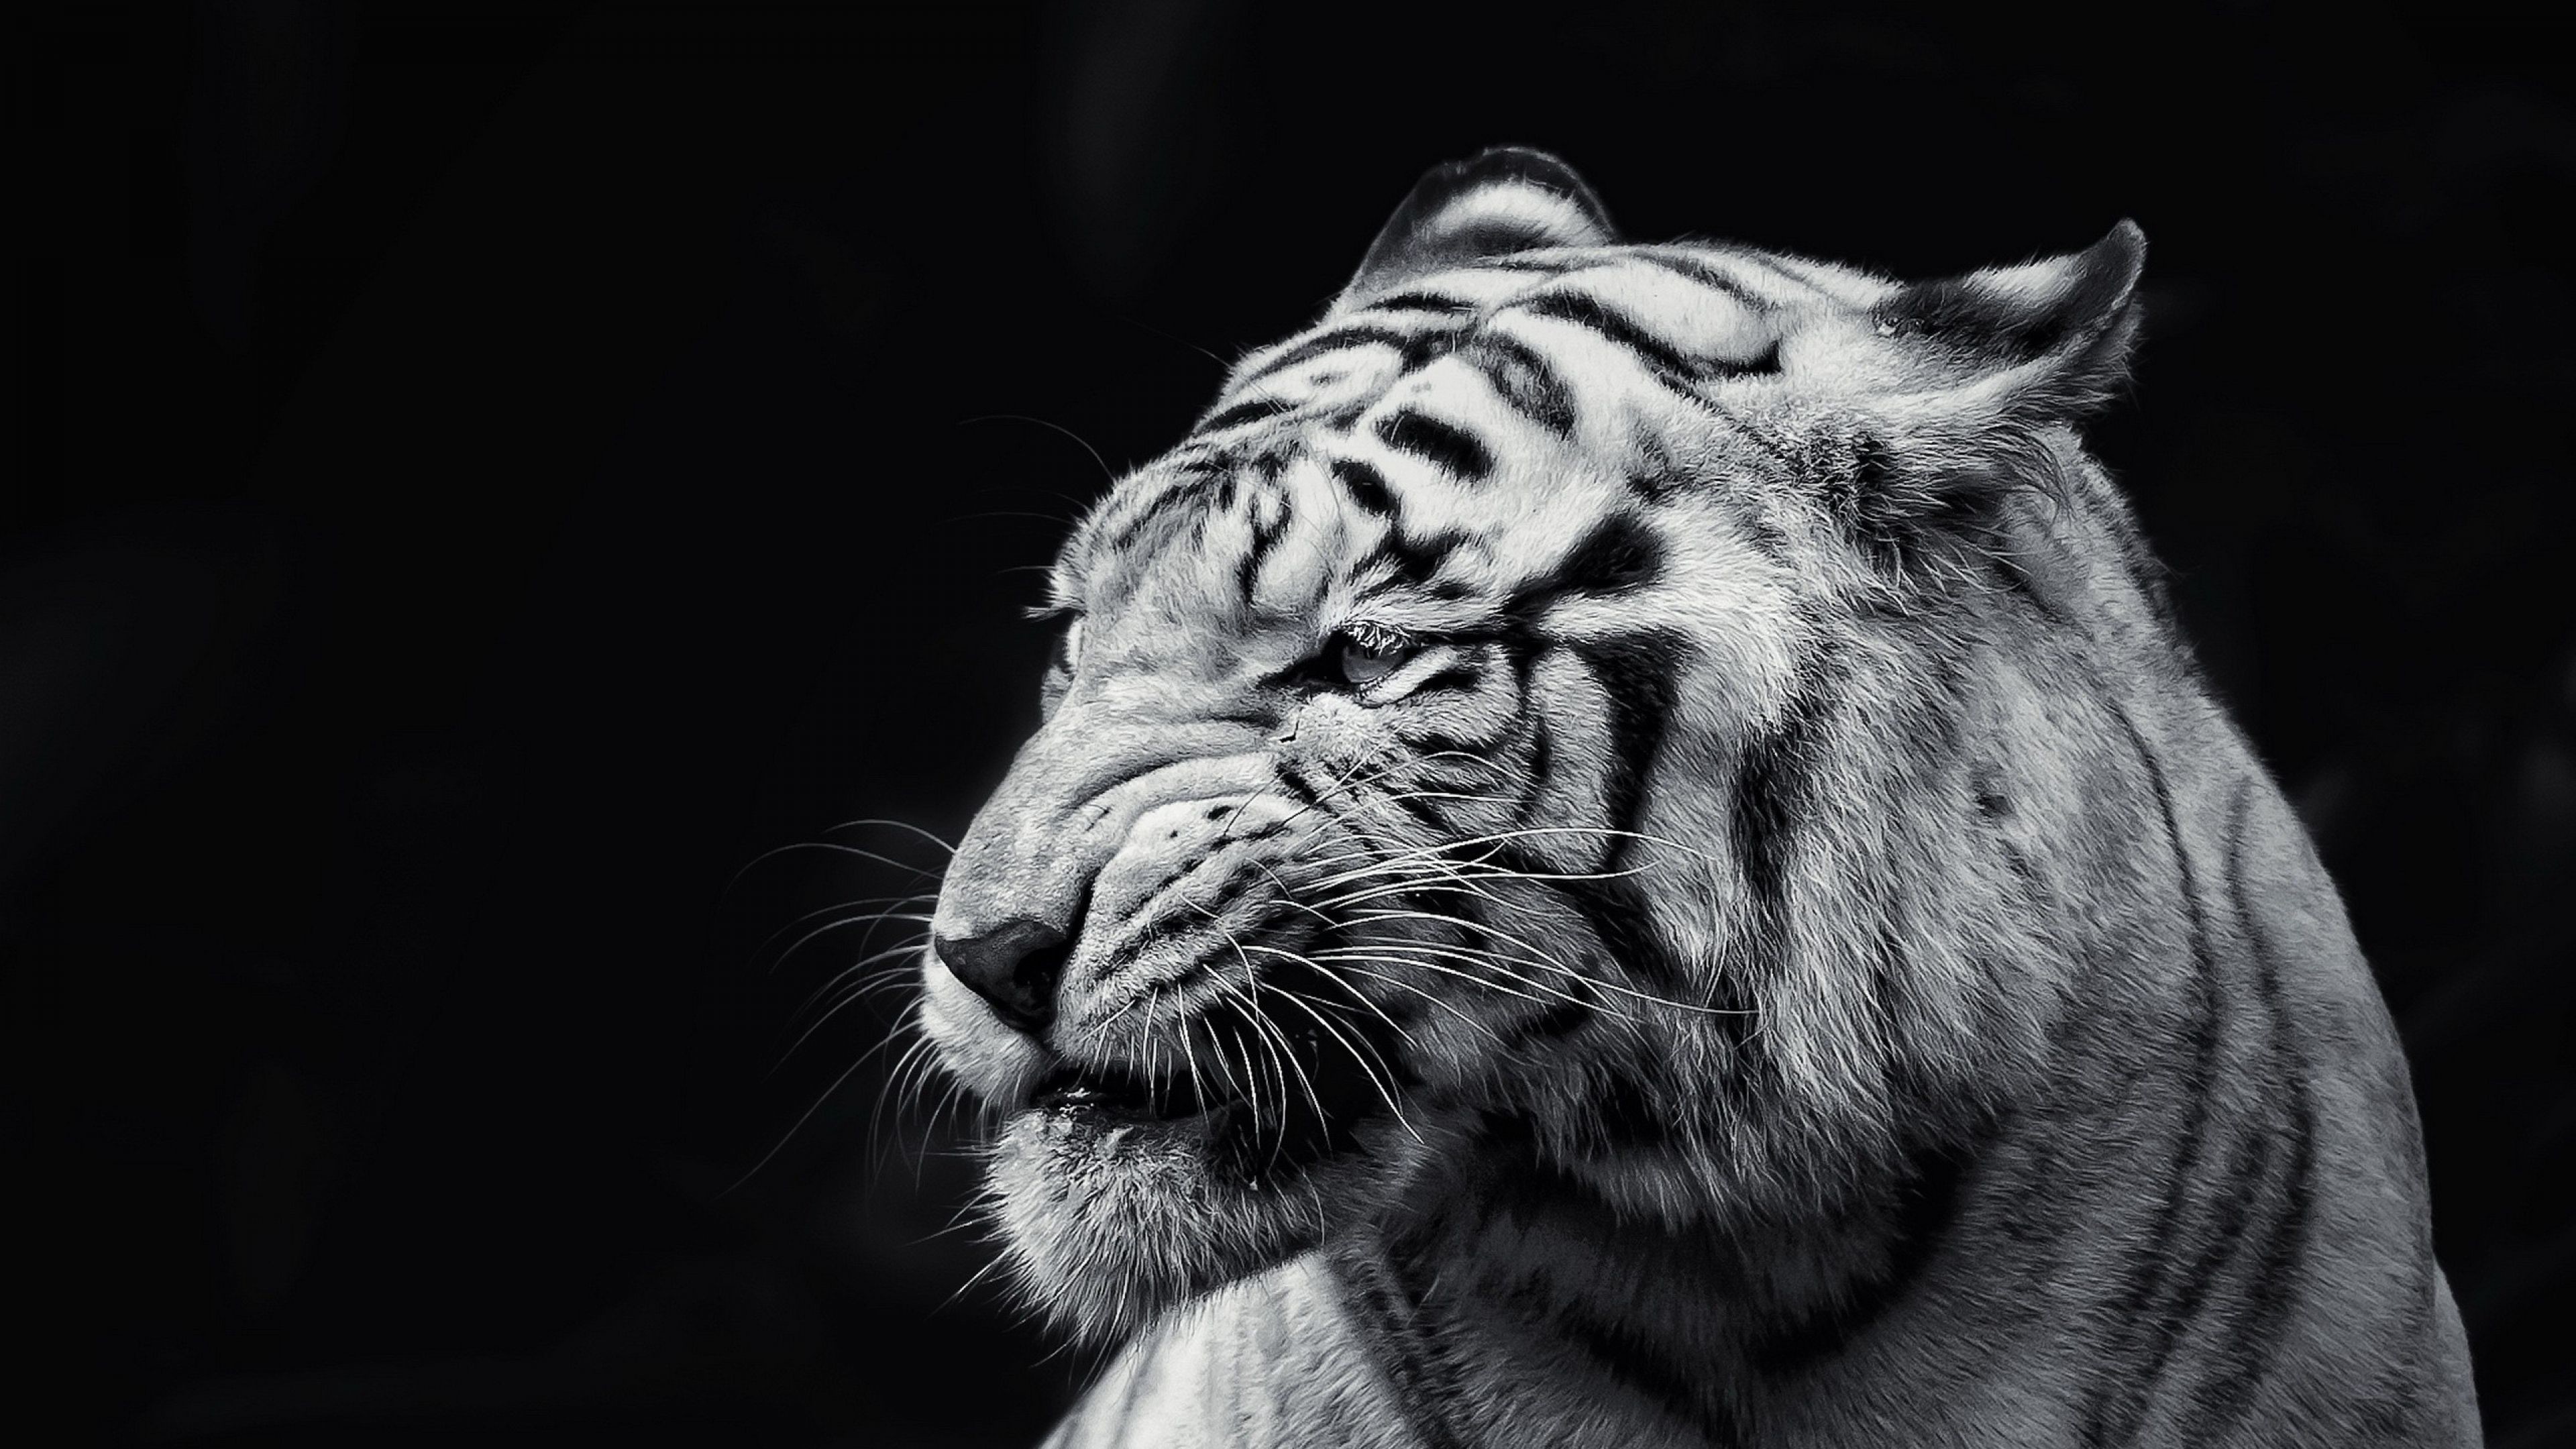 3840x2160 Download Wallpaper  Tiger, Face, Eyes, Black and white 4K .